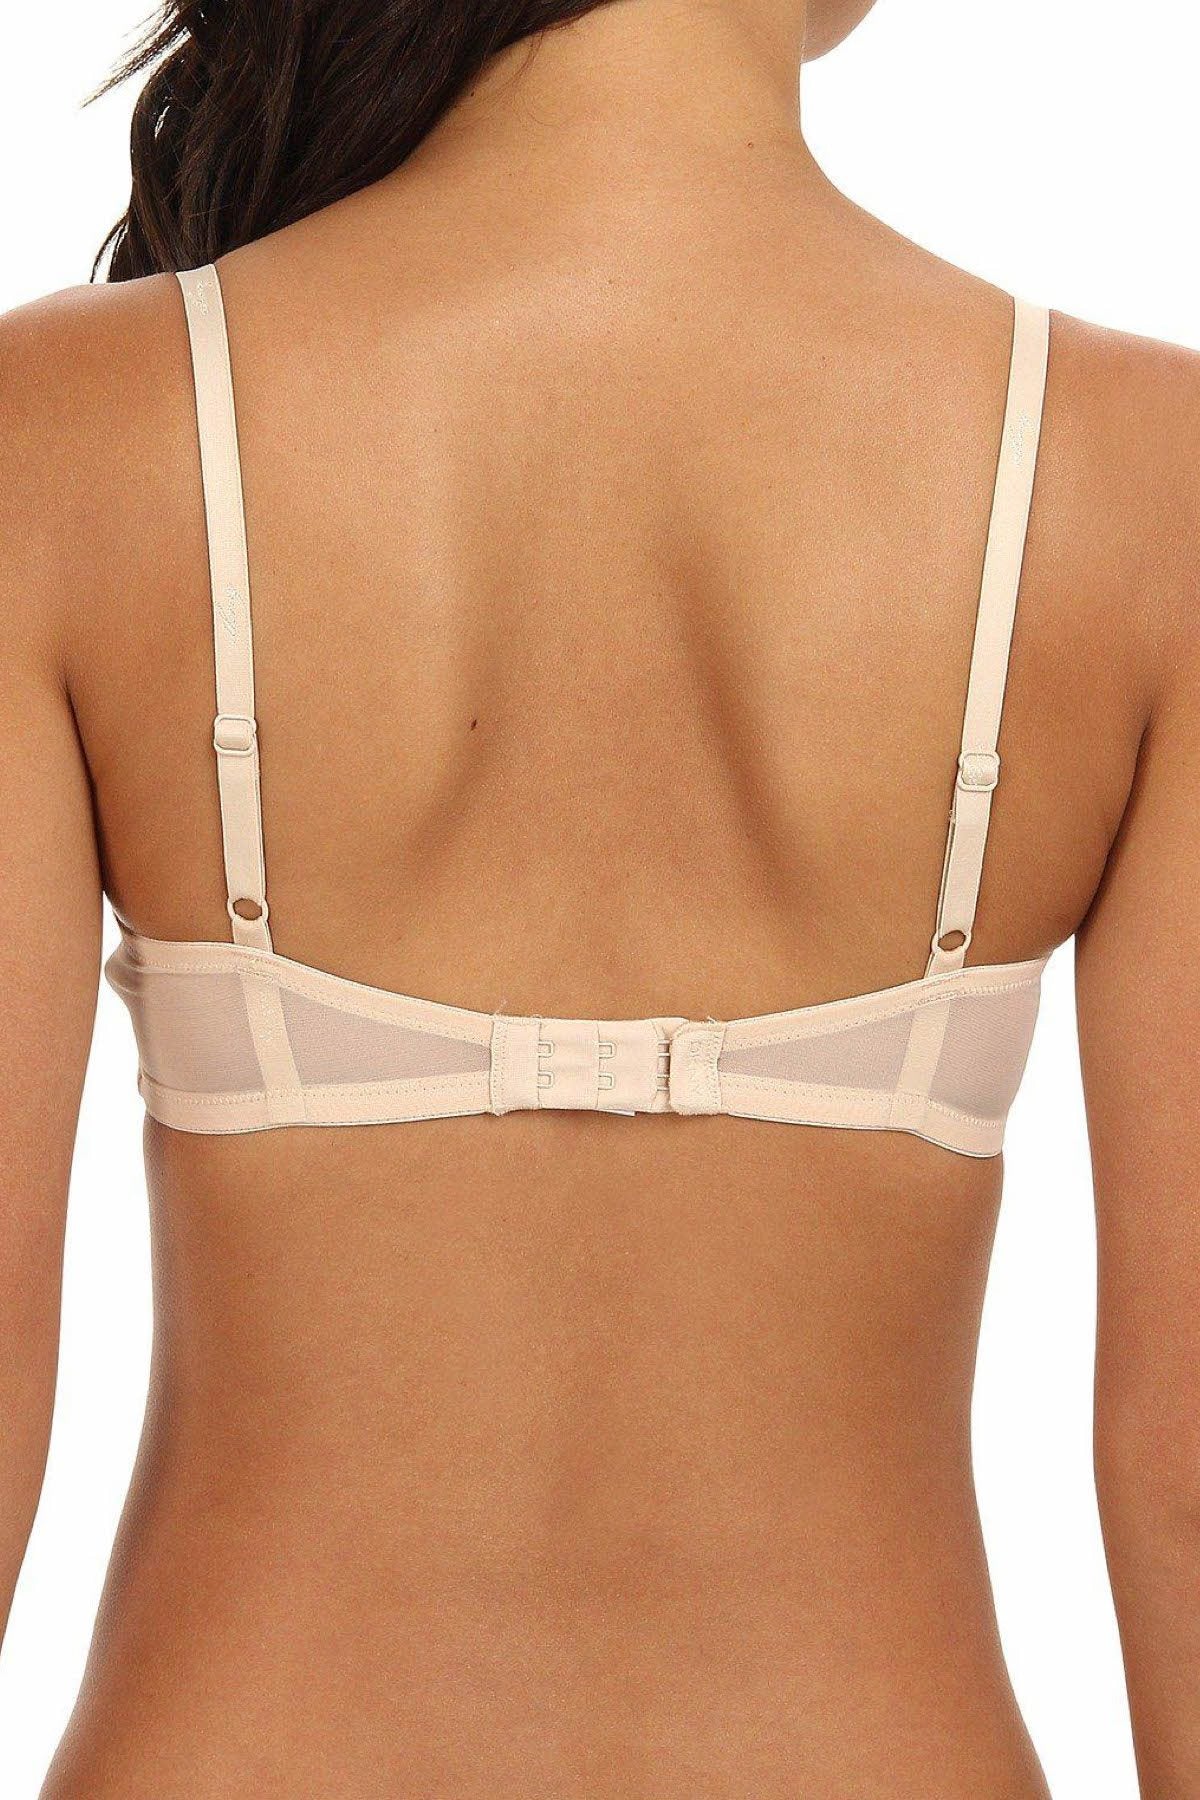 DKNY Nude Signature-Lace Unlined Underwire Bra